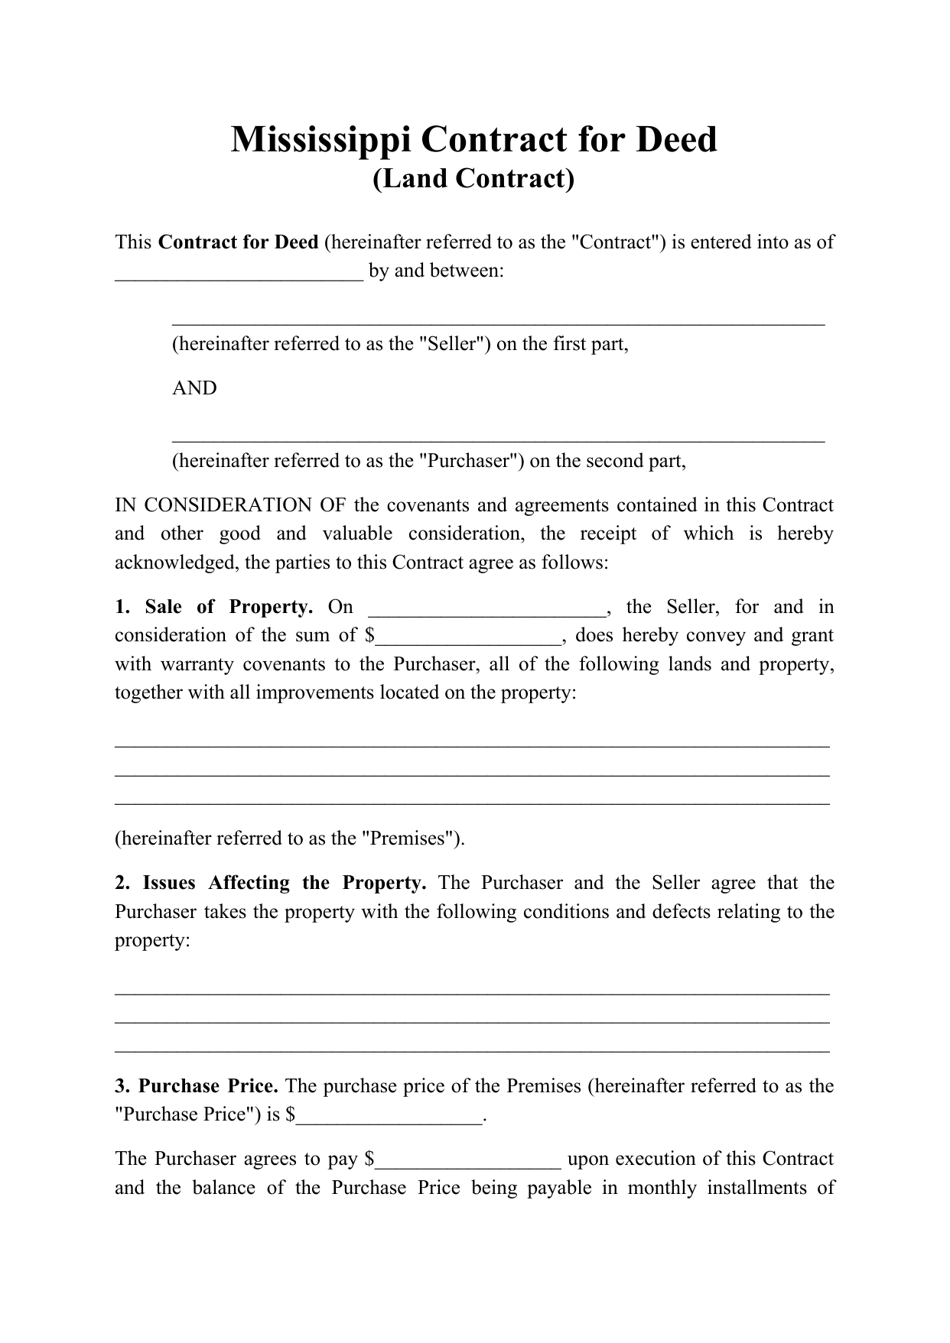 Contract for Deed (Land Contract) - Mississippi, Page 1